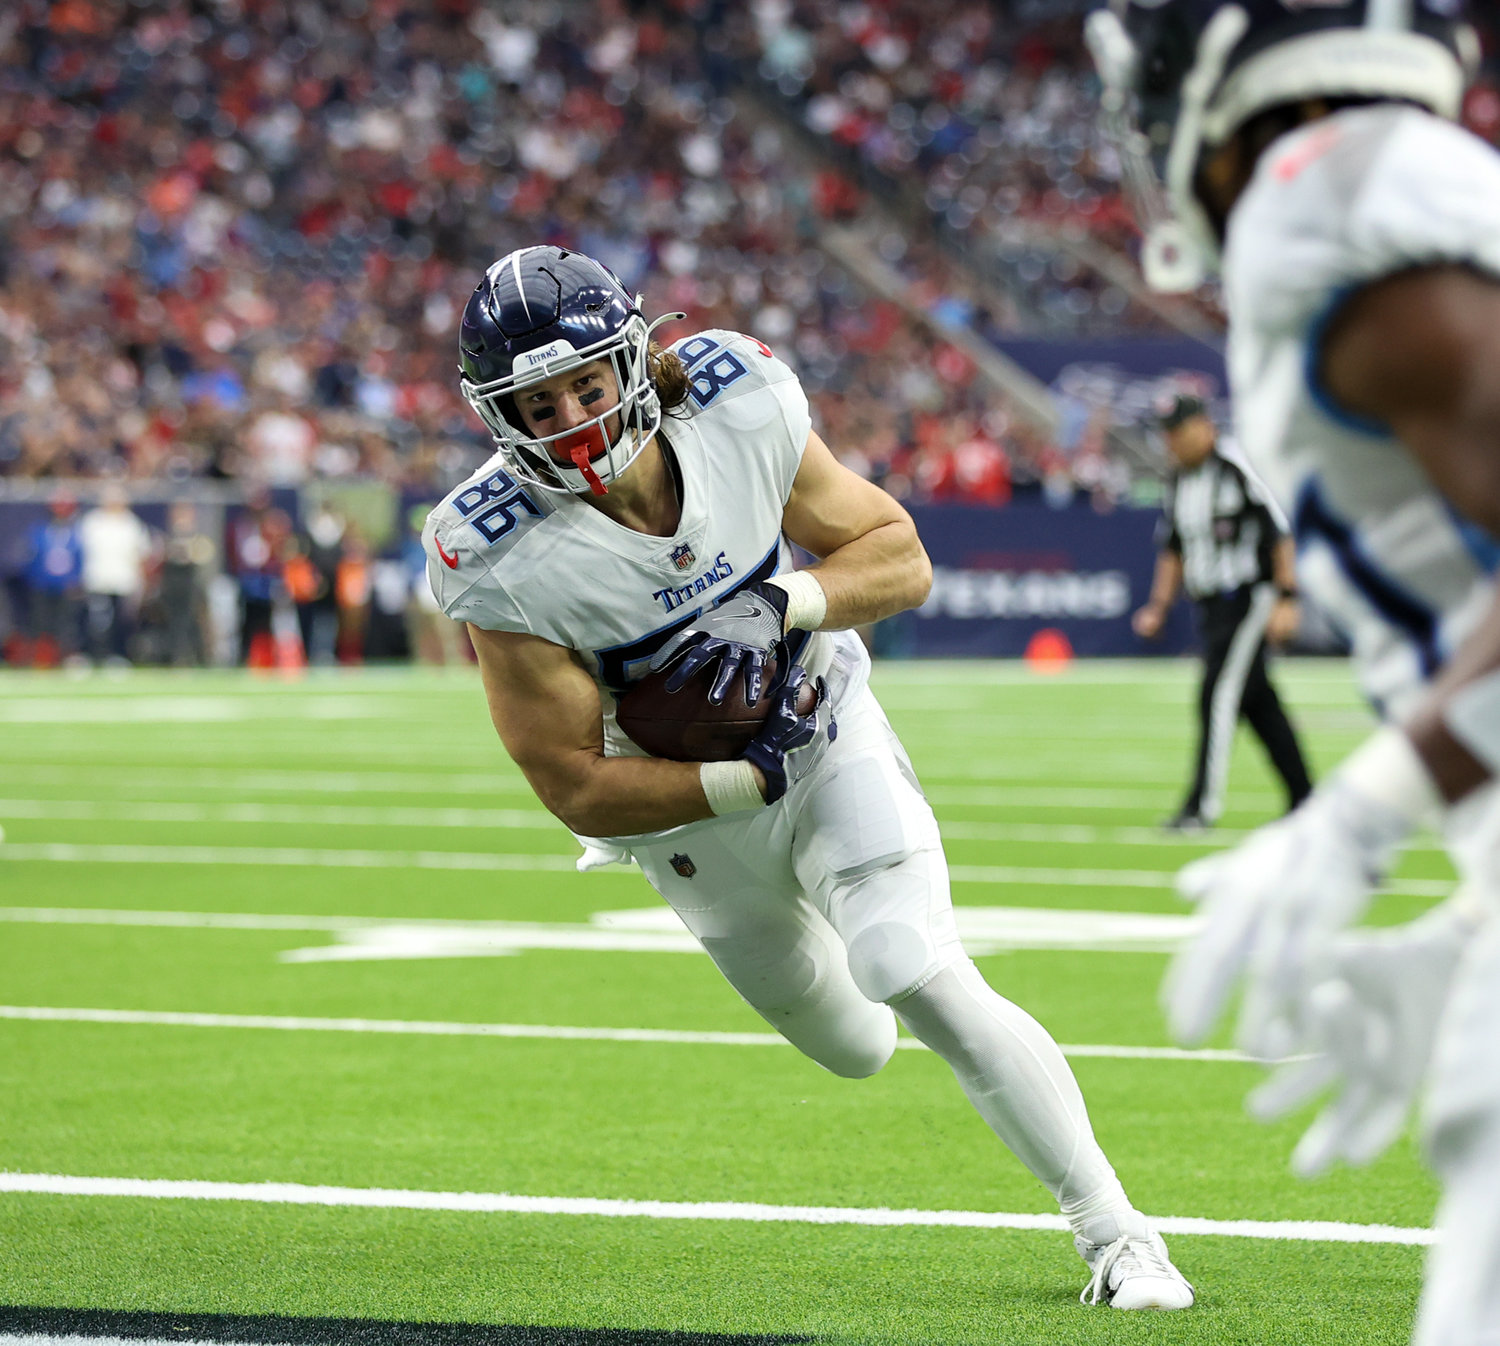 Tennessee Titans tight end Anthony Firkser (86) scores on a 5-yard touchdown catch in the second quarter of an NFL game between the Texans and the Titans on Jan. 9, 2022 in Houston, Texas. The Titans won, 28-25.